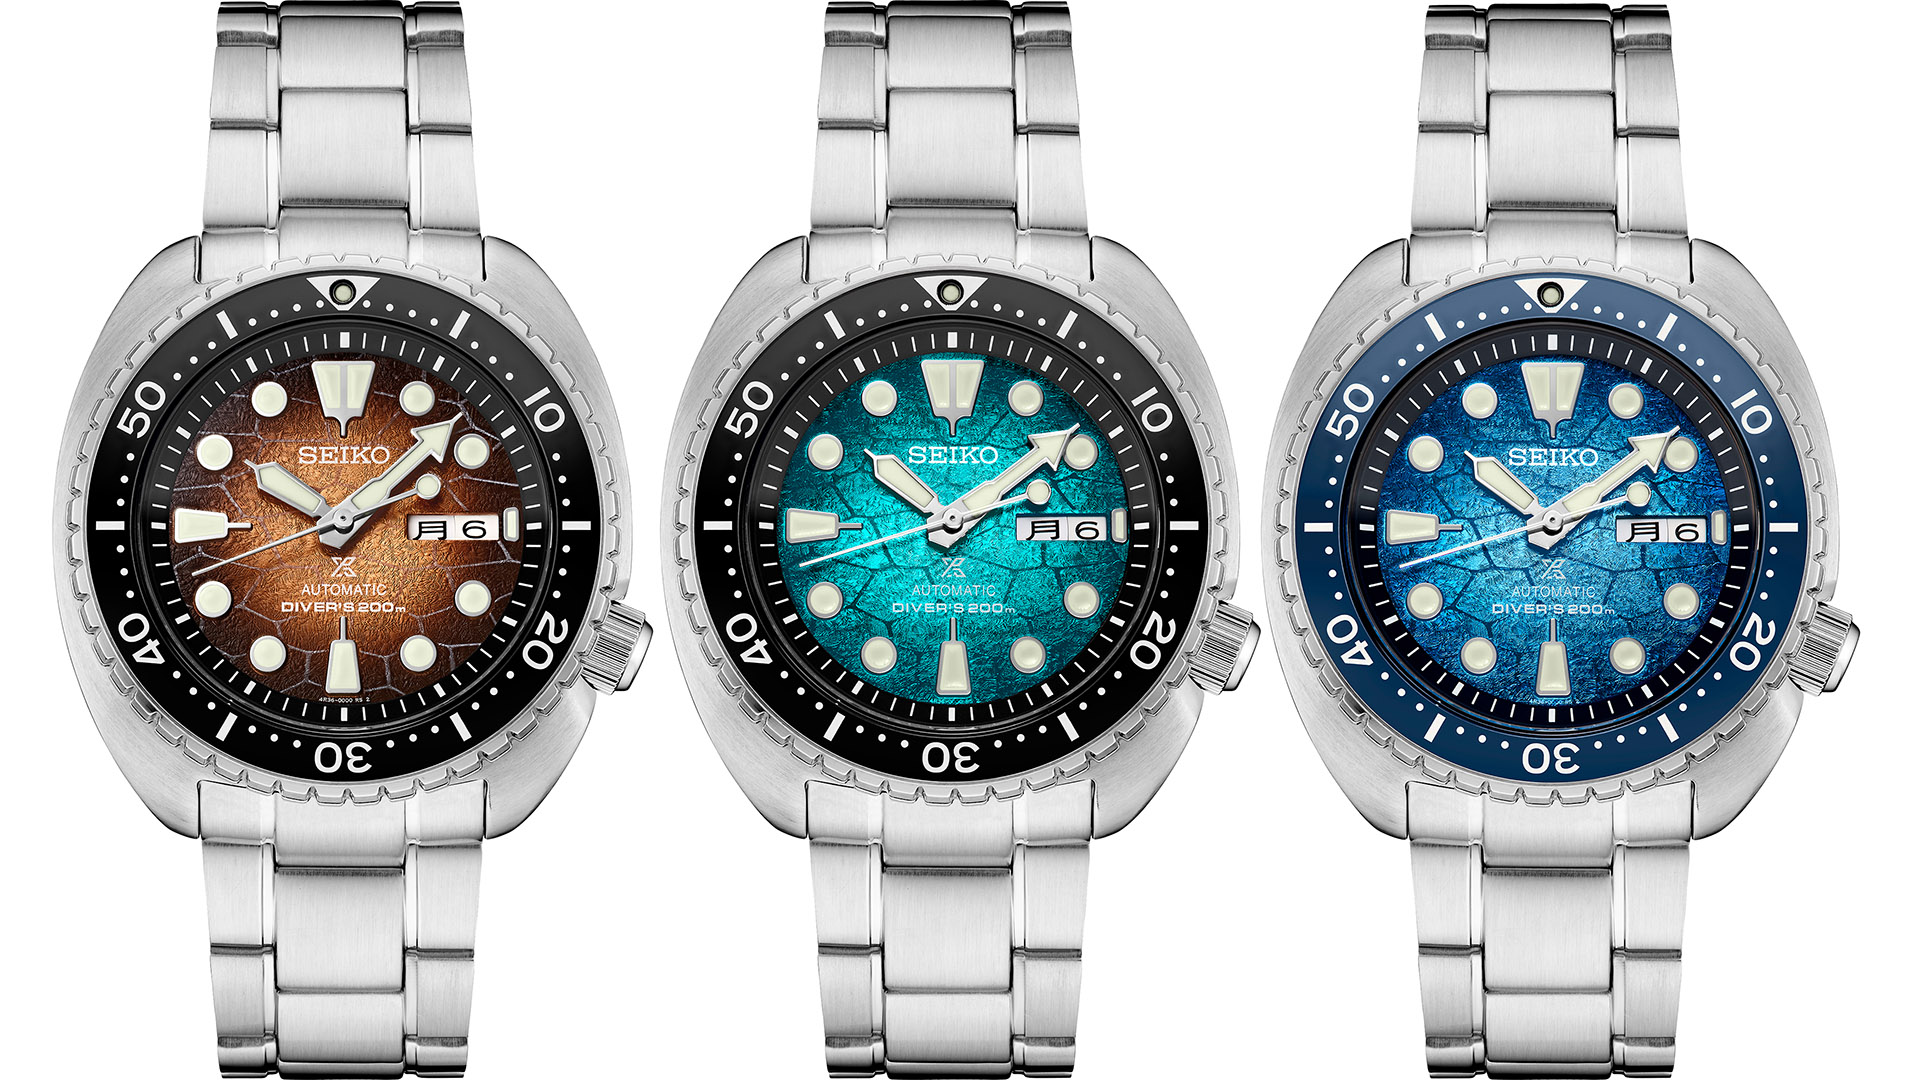 Seiko Of Prospex Special Edition Dive Watches Inspired Sea Turtles | aBlogtoWatch